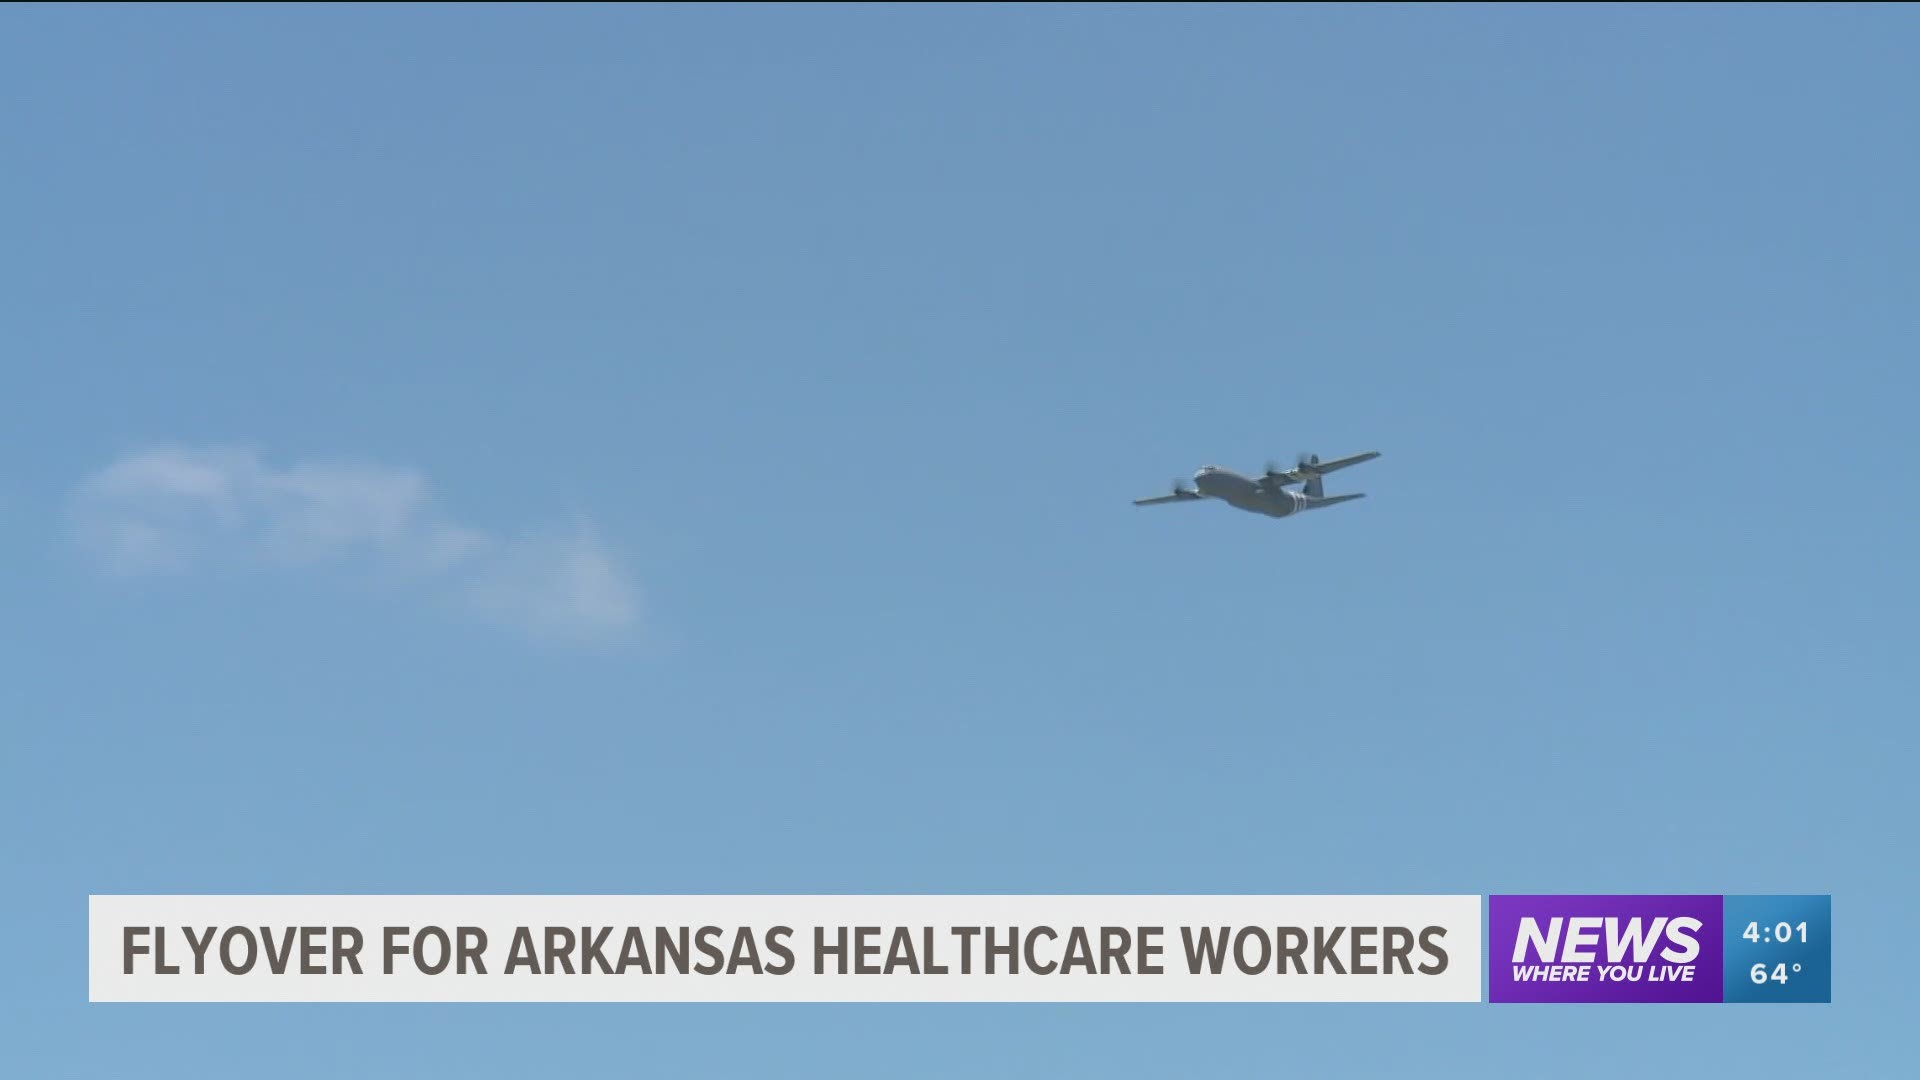 Flyover for Arkansas healthcare workers